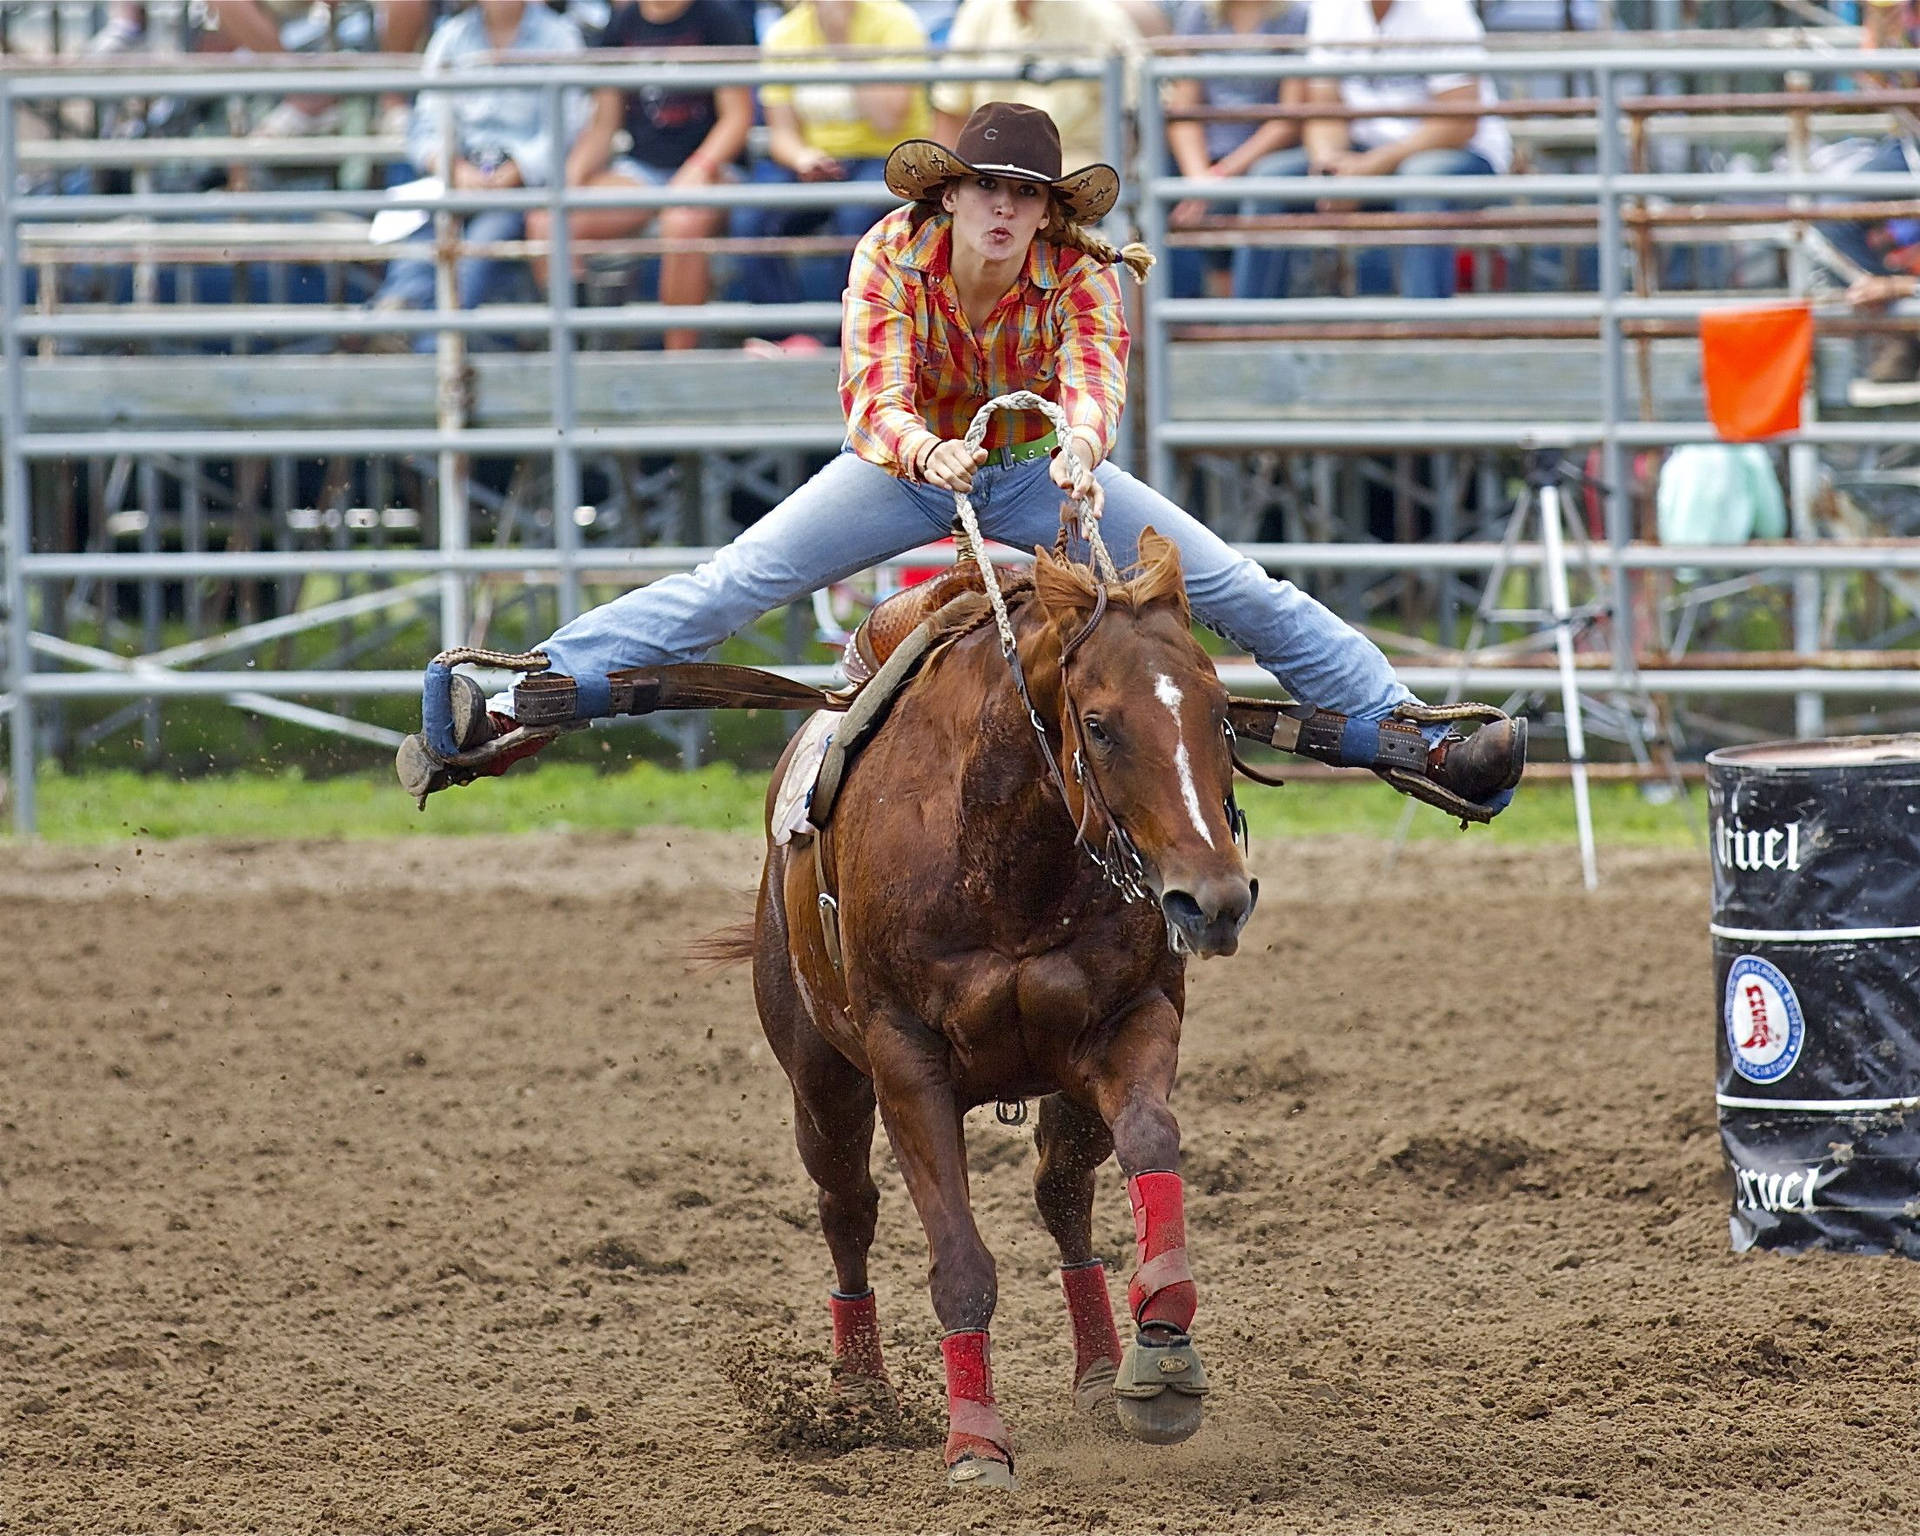 An electrifying moment of barrel racing in action Wallpaper